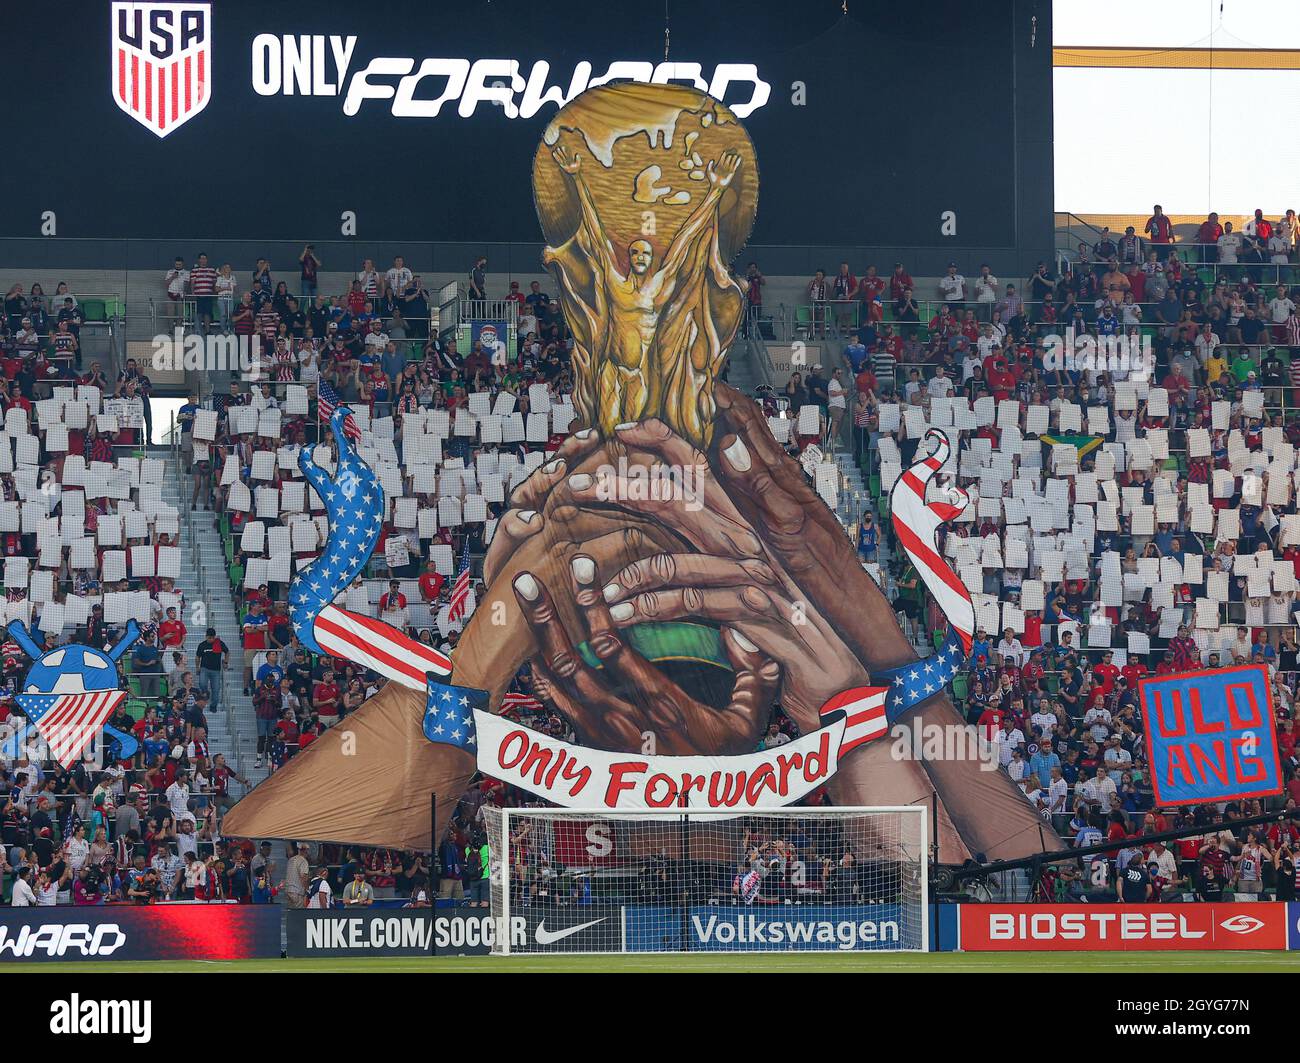 October 7, 2021: A tifo is raised before the start of a FIFA World Cup  qualifier between the United States and Jamaica on October 7, 2021 in  Austin, Texas. USA won 2-0 (